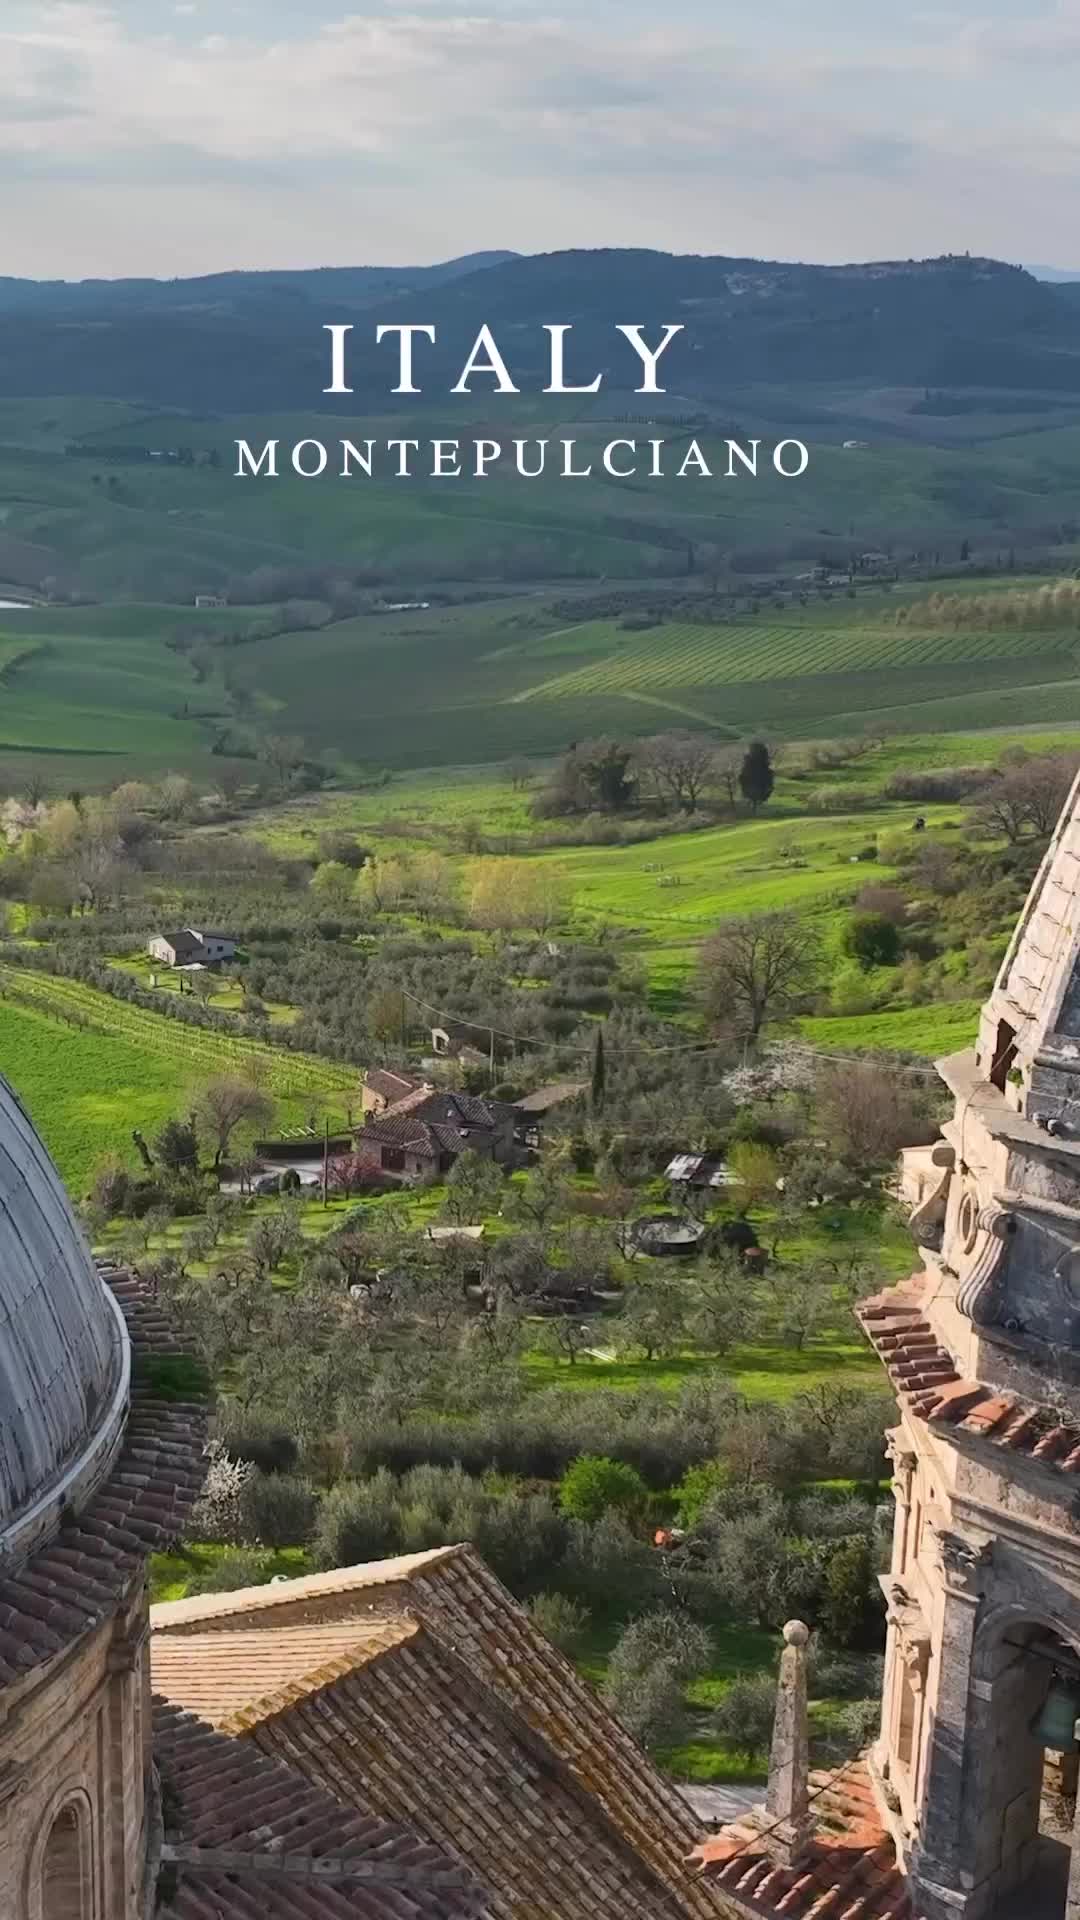 Take a breathtaking tour of Montepulciano, the picturesque medieval town in Tuscany. Discover the town’s ancient walls, stunning vistas, and local wines. #Montepulciano #Tuscany #Italy #MedievalTown #Travel #WineTasting #Siena #hilltoptown #Borgi #MedievalVillages #HistoricTowns #Italy #Tuscany #Travel #ExploringItaly #Culture #Heritage #Architecture #OffTheBeatenPath #hiddengems